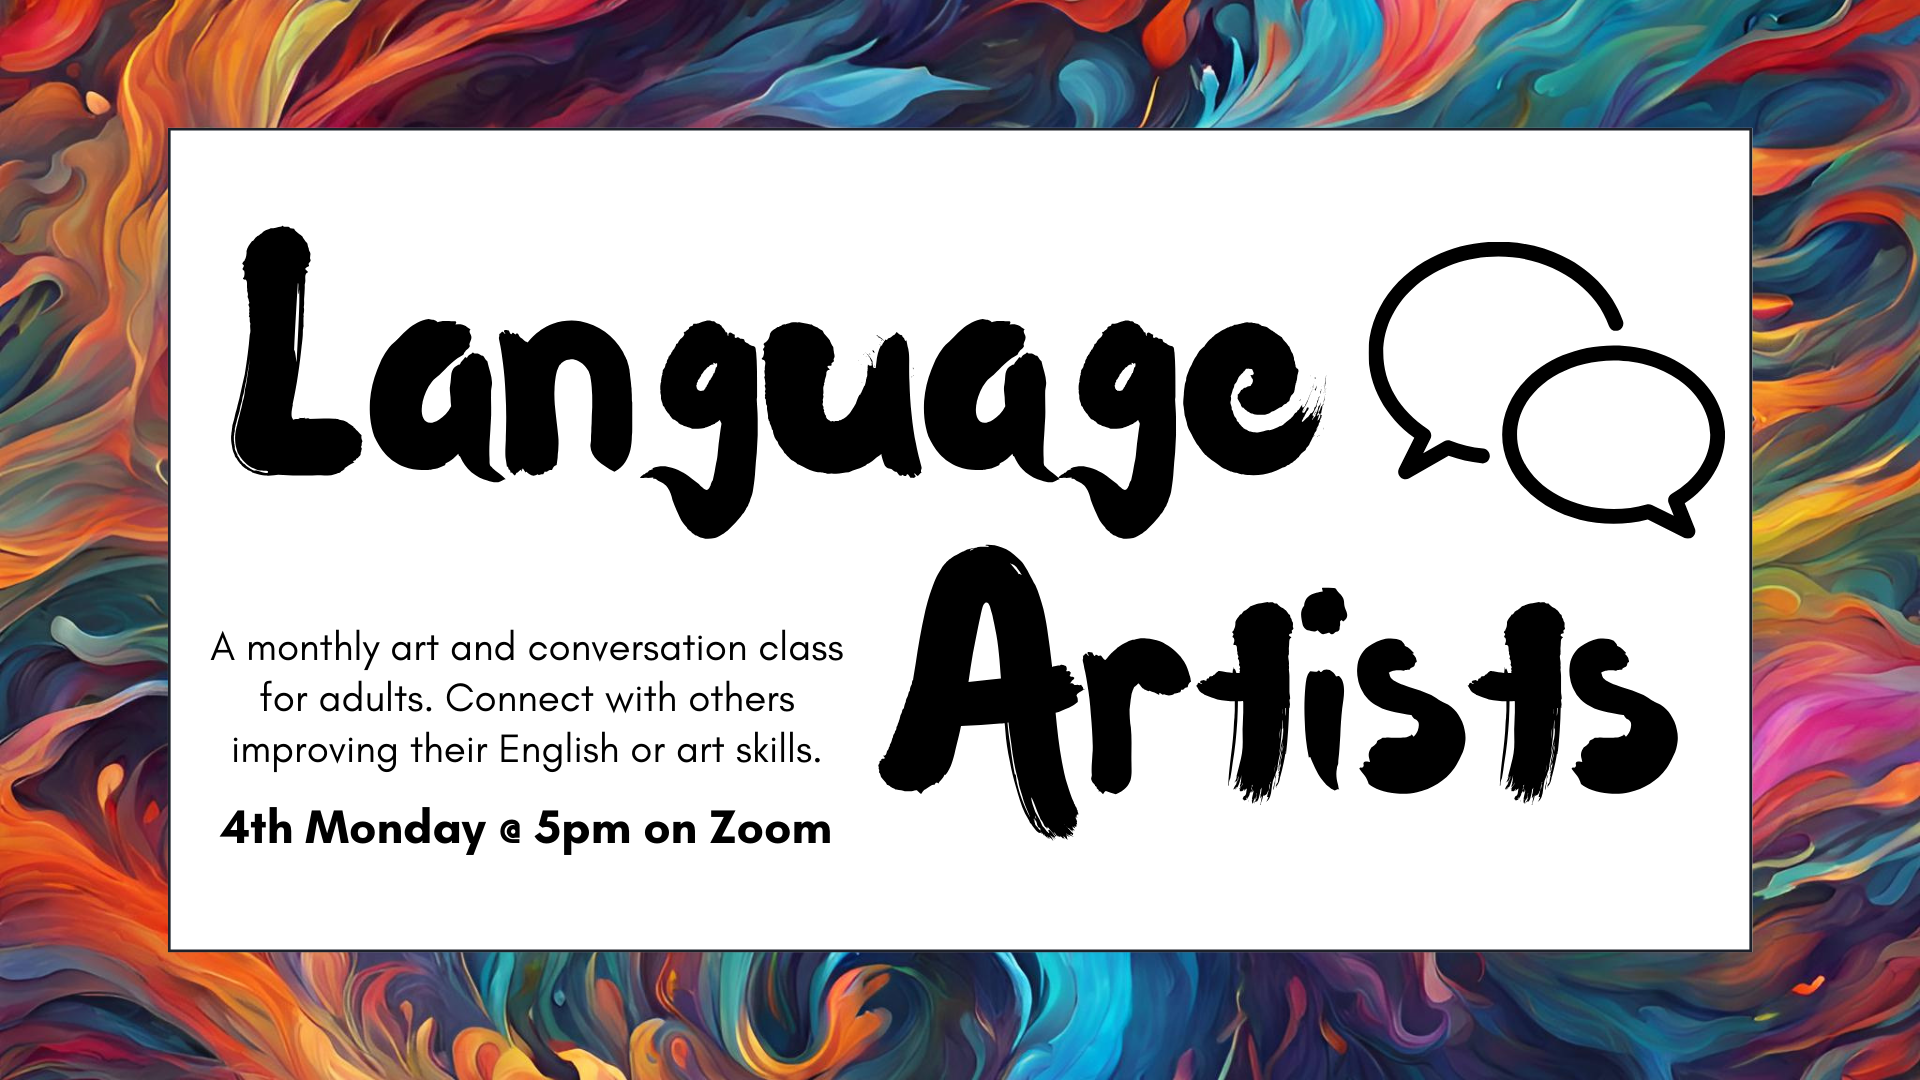 Language Artists. A monthly art and conversation class for adults. Connect with others improving their English or art skills. 4th Monday @ 5pm on Zoom